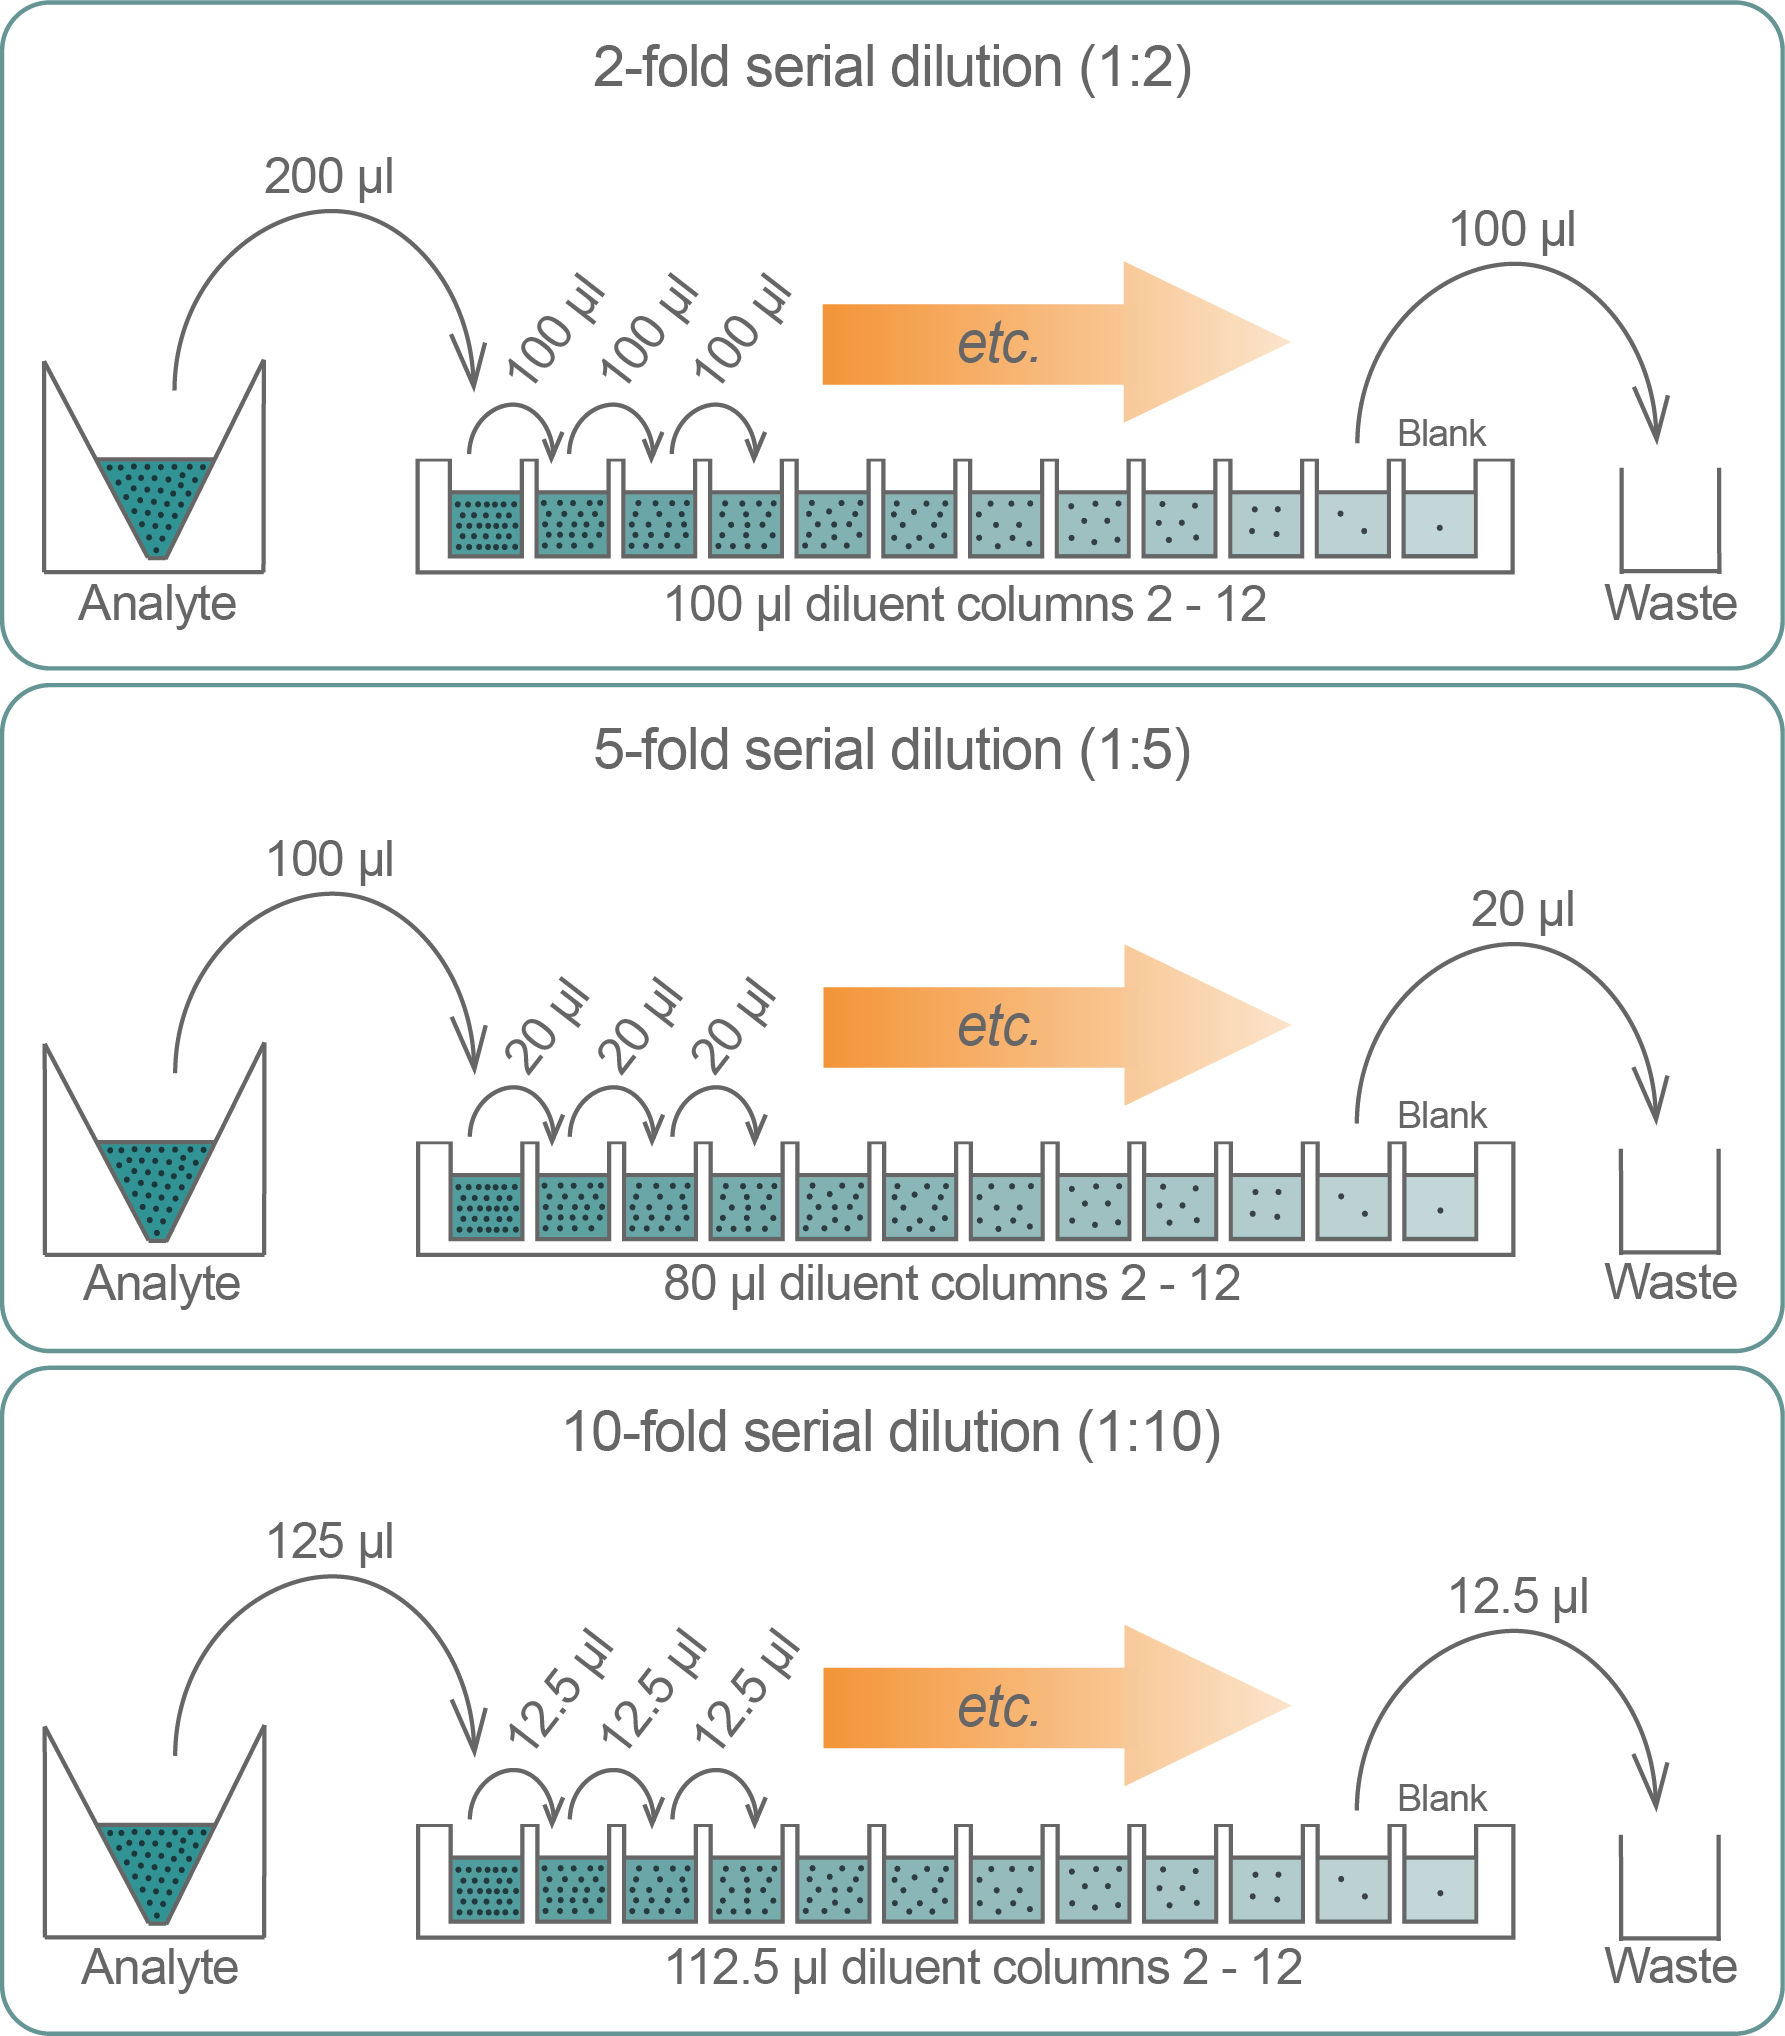 Illustration of 2-fold serial dilution, 5-fold serial dilution and 10 fold serial dilutions in 96 well flat bottom plates when using the 125 µl VOYAGER adjustable tip spacing pipette.